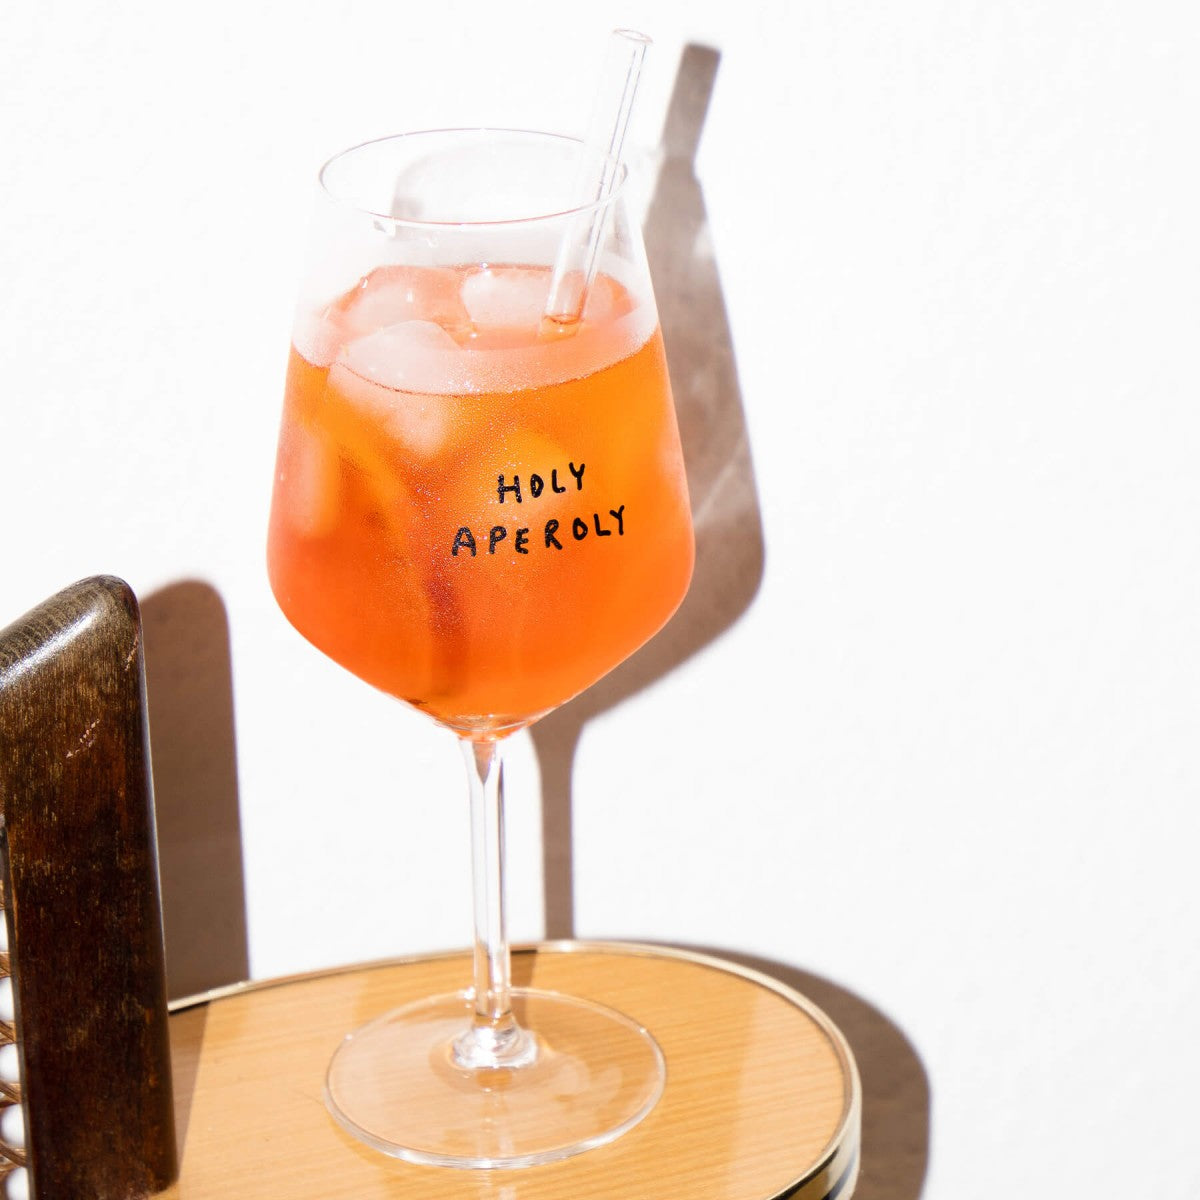 Wine glass / Aperol glass - Holy Aperoly